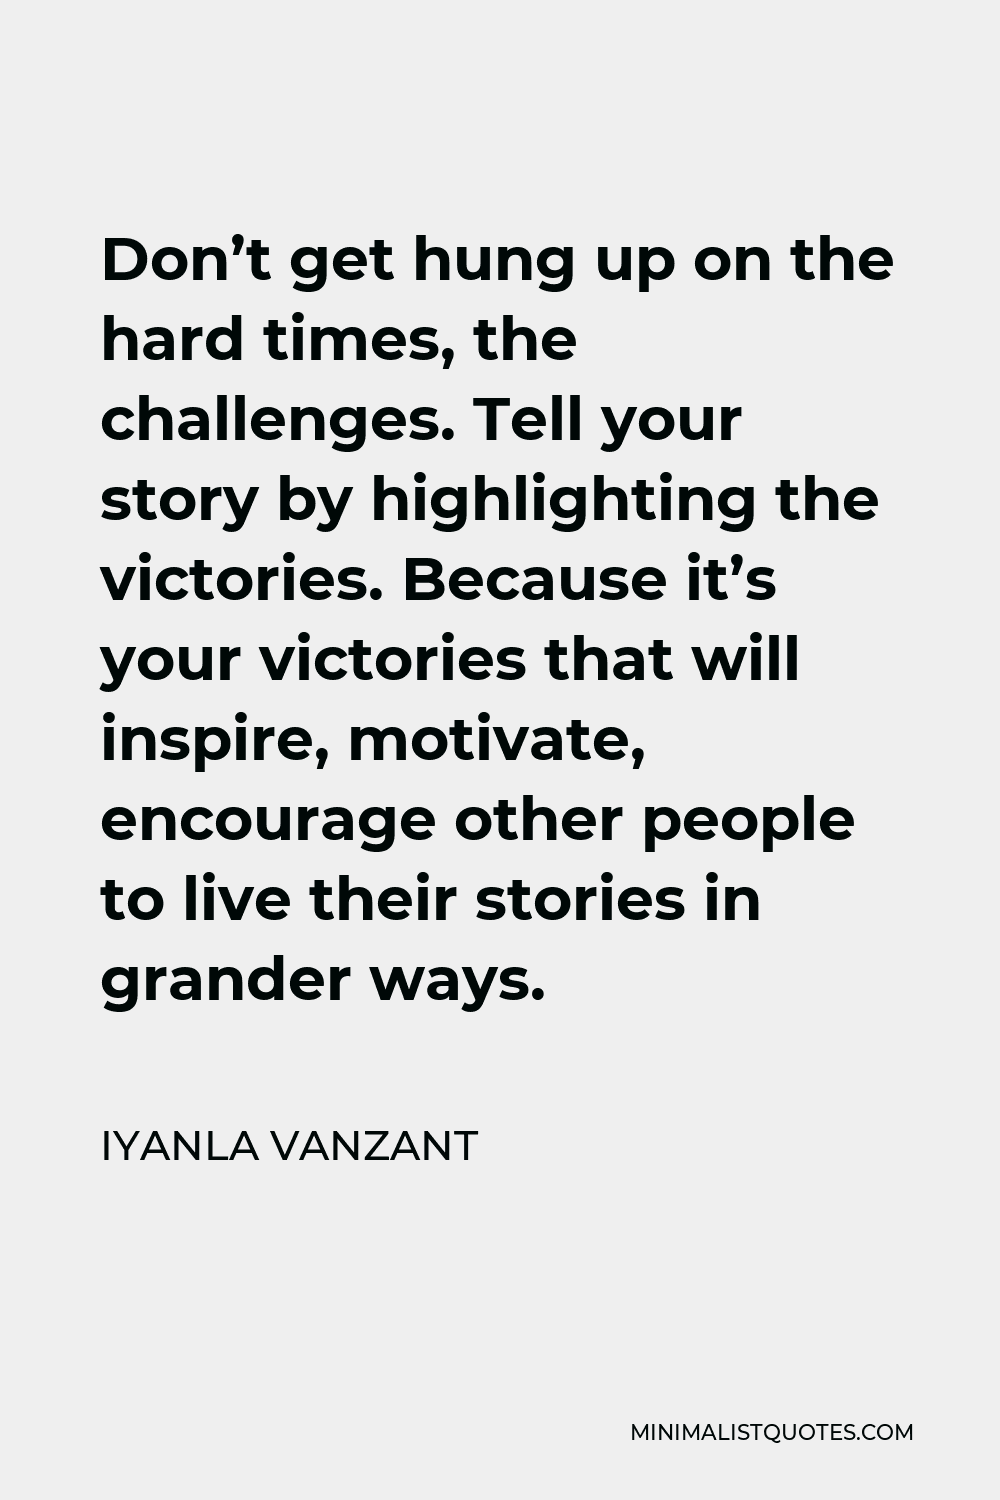 Iyanla Vanzant Quote - Don’t get hung up on the hard times, the challenges. Tell your story by highlighting the victories. Because it’s your victories that will inspire, motivate, encourage other people to live their stories in grander ways.